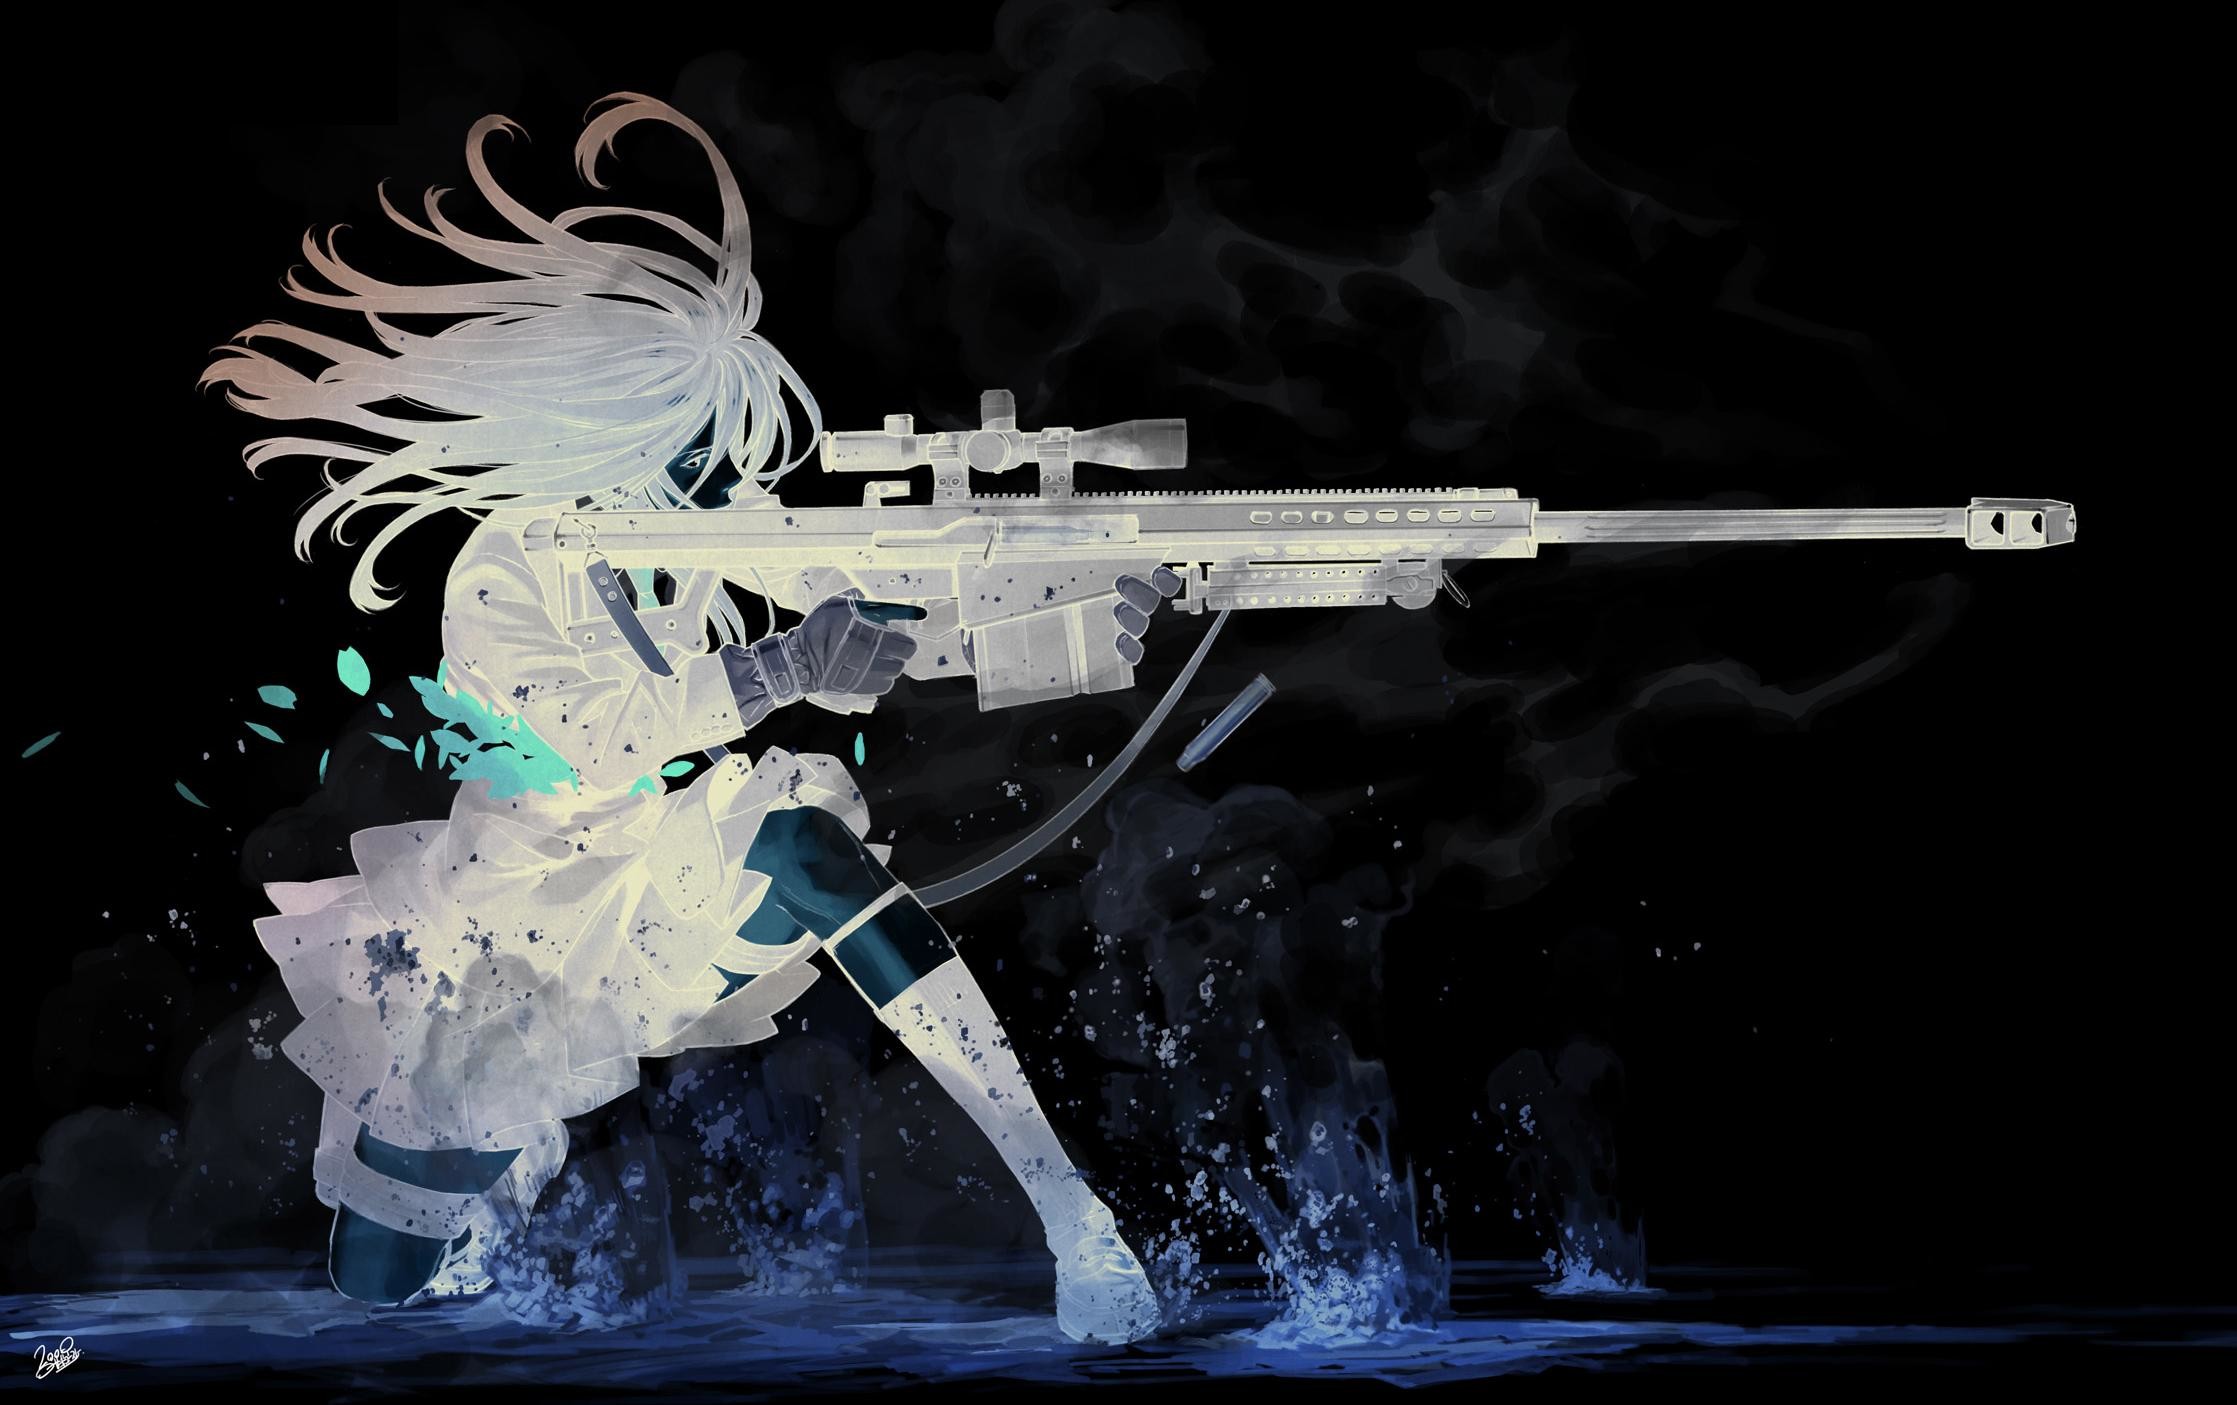 2237x1405 Sniper Category General This Free Desktop Wallpaper Has Been Viewed